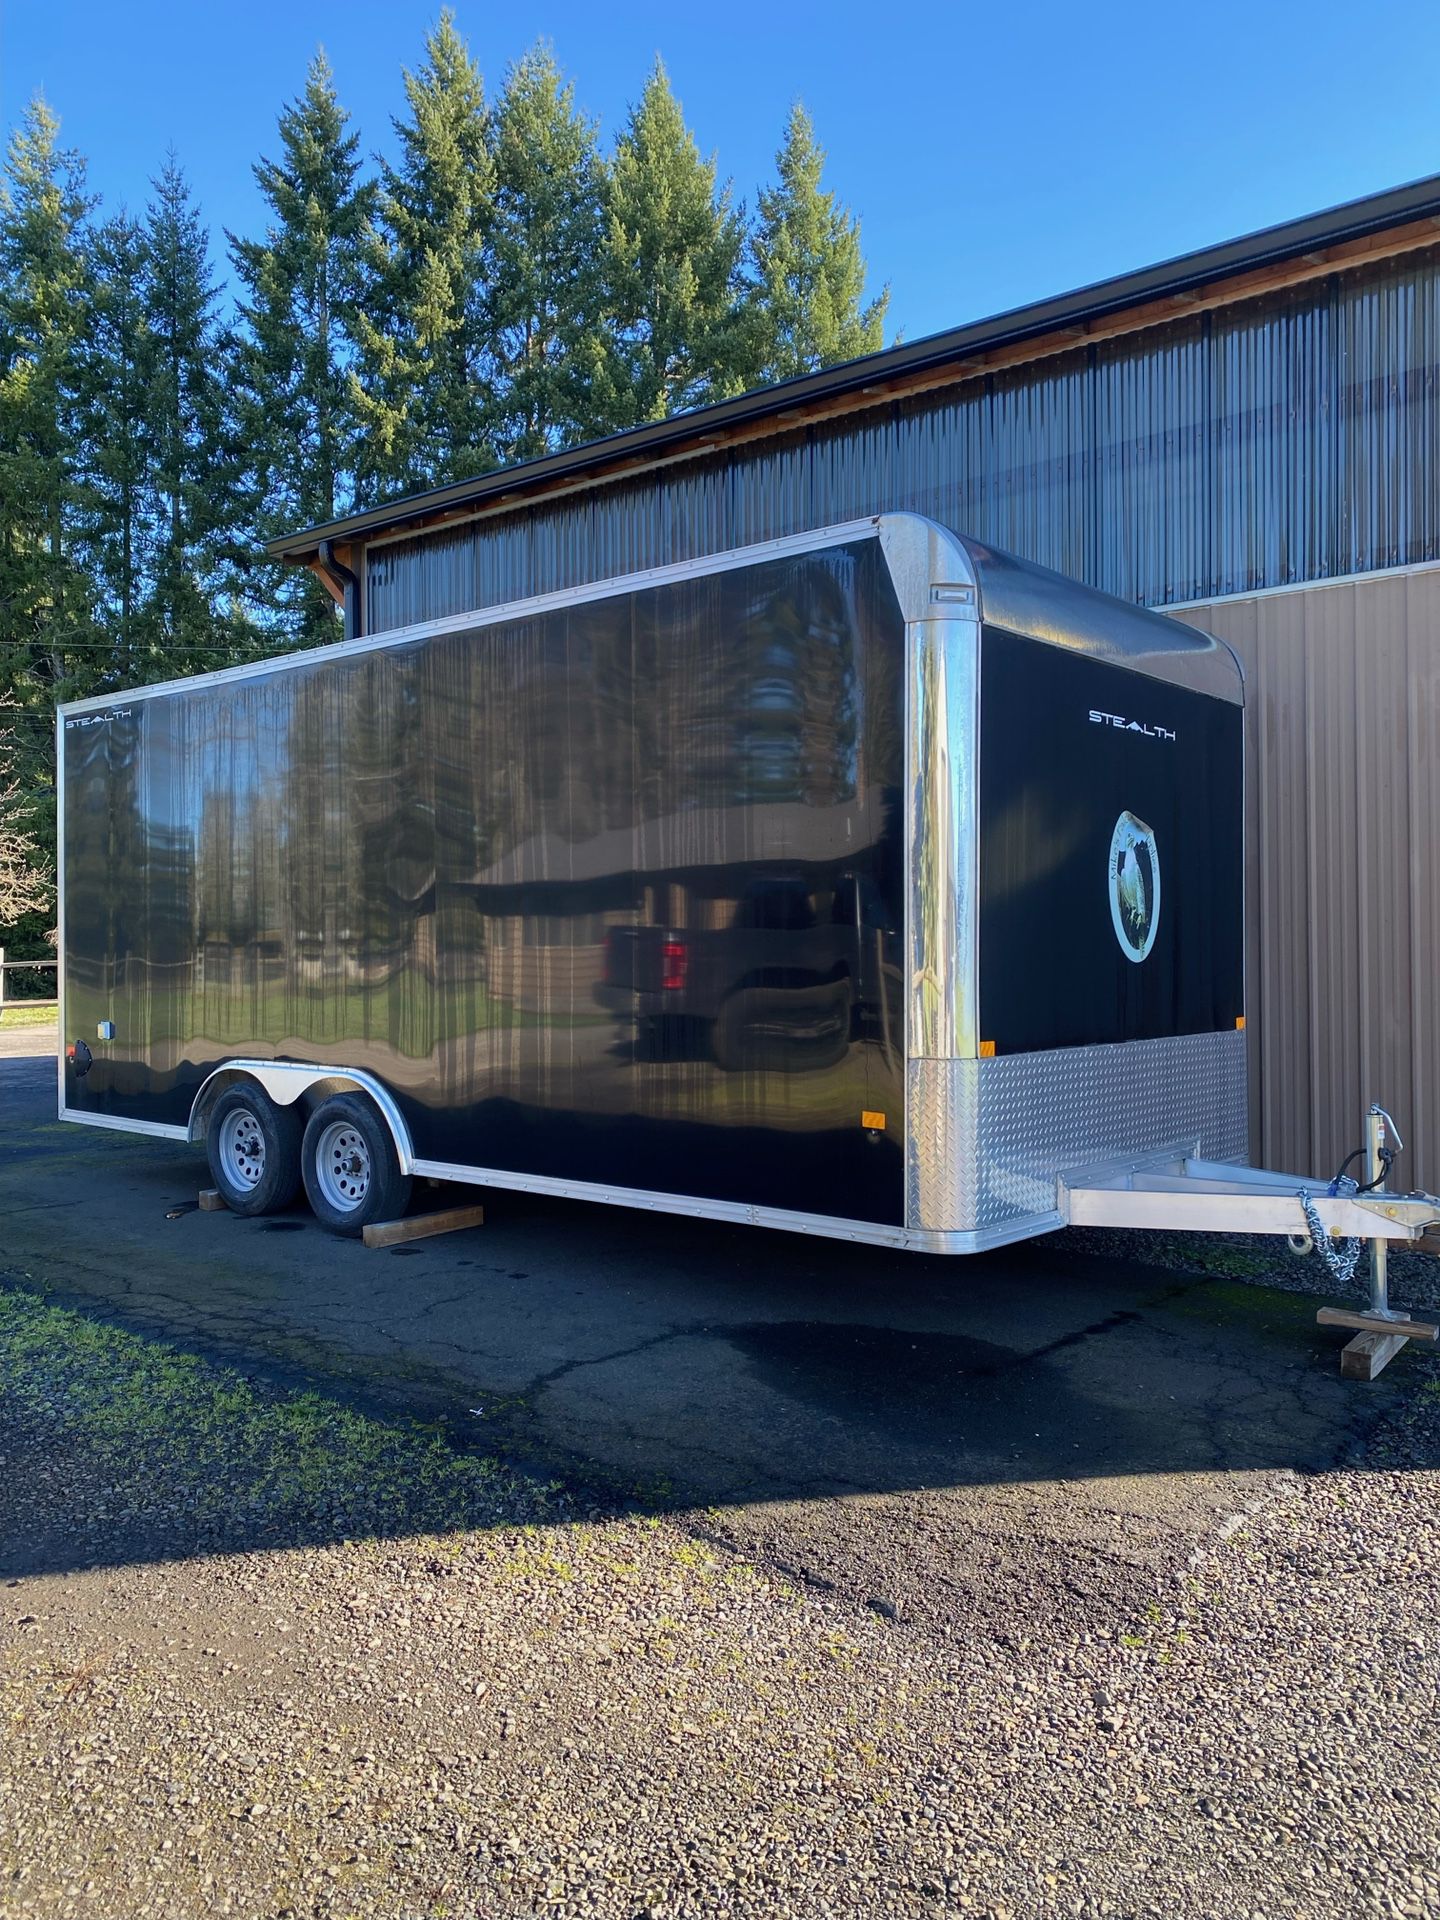 2021  stealth Car hauler  20ft X 8.5 Wide Inside 7.5 Tall. Only Used For Storing Inside Trailer And Only Driven On The Road A Few Times. One Owner.